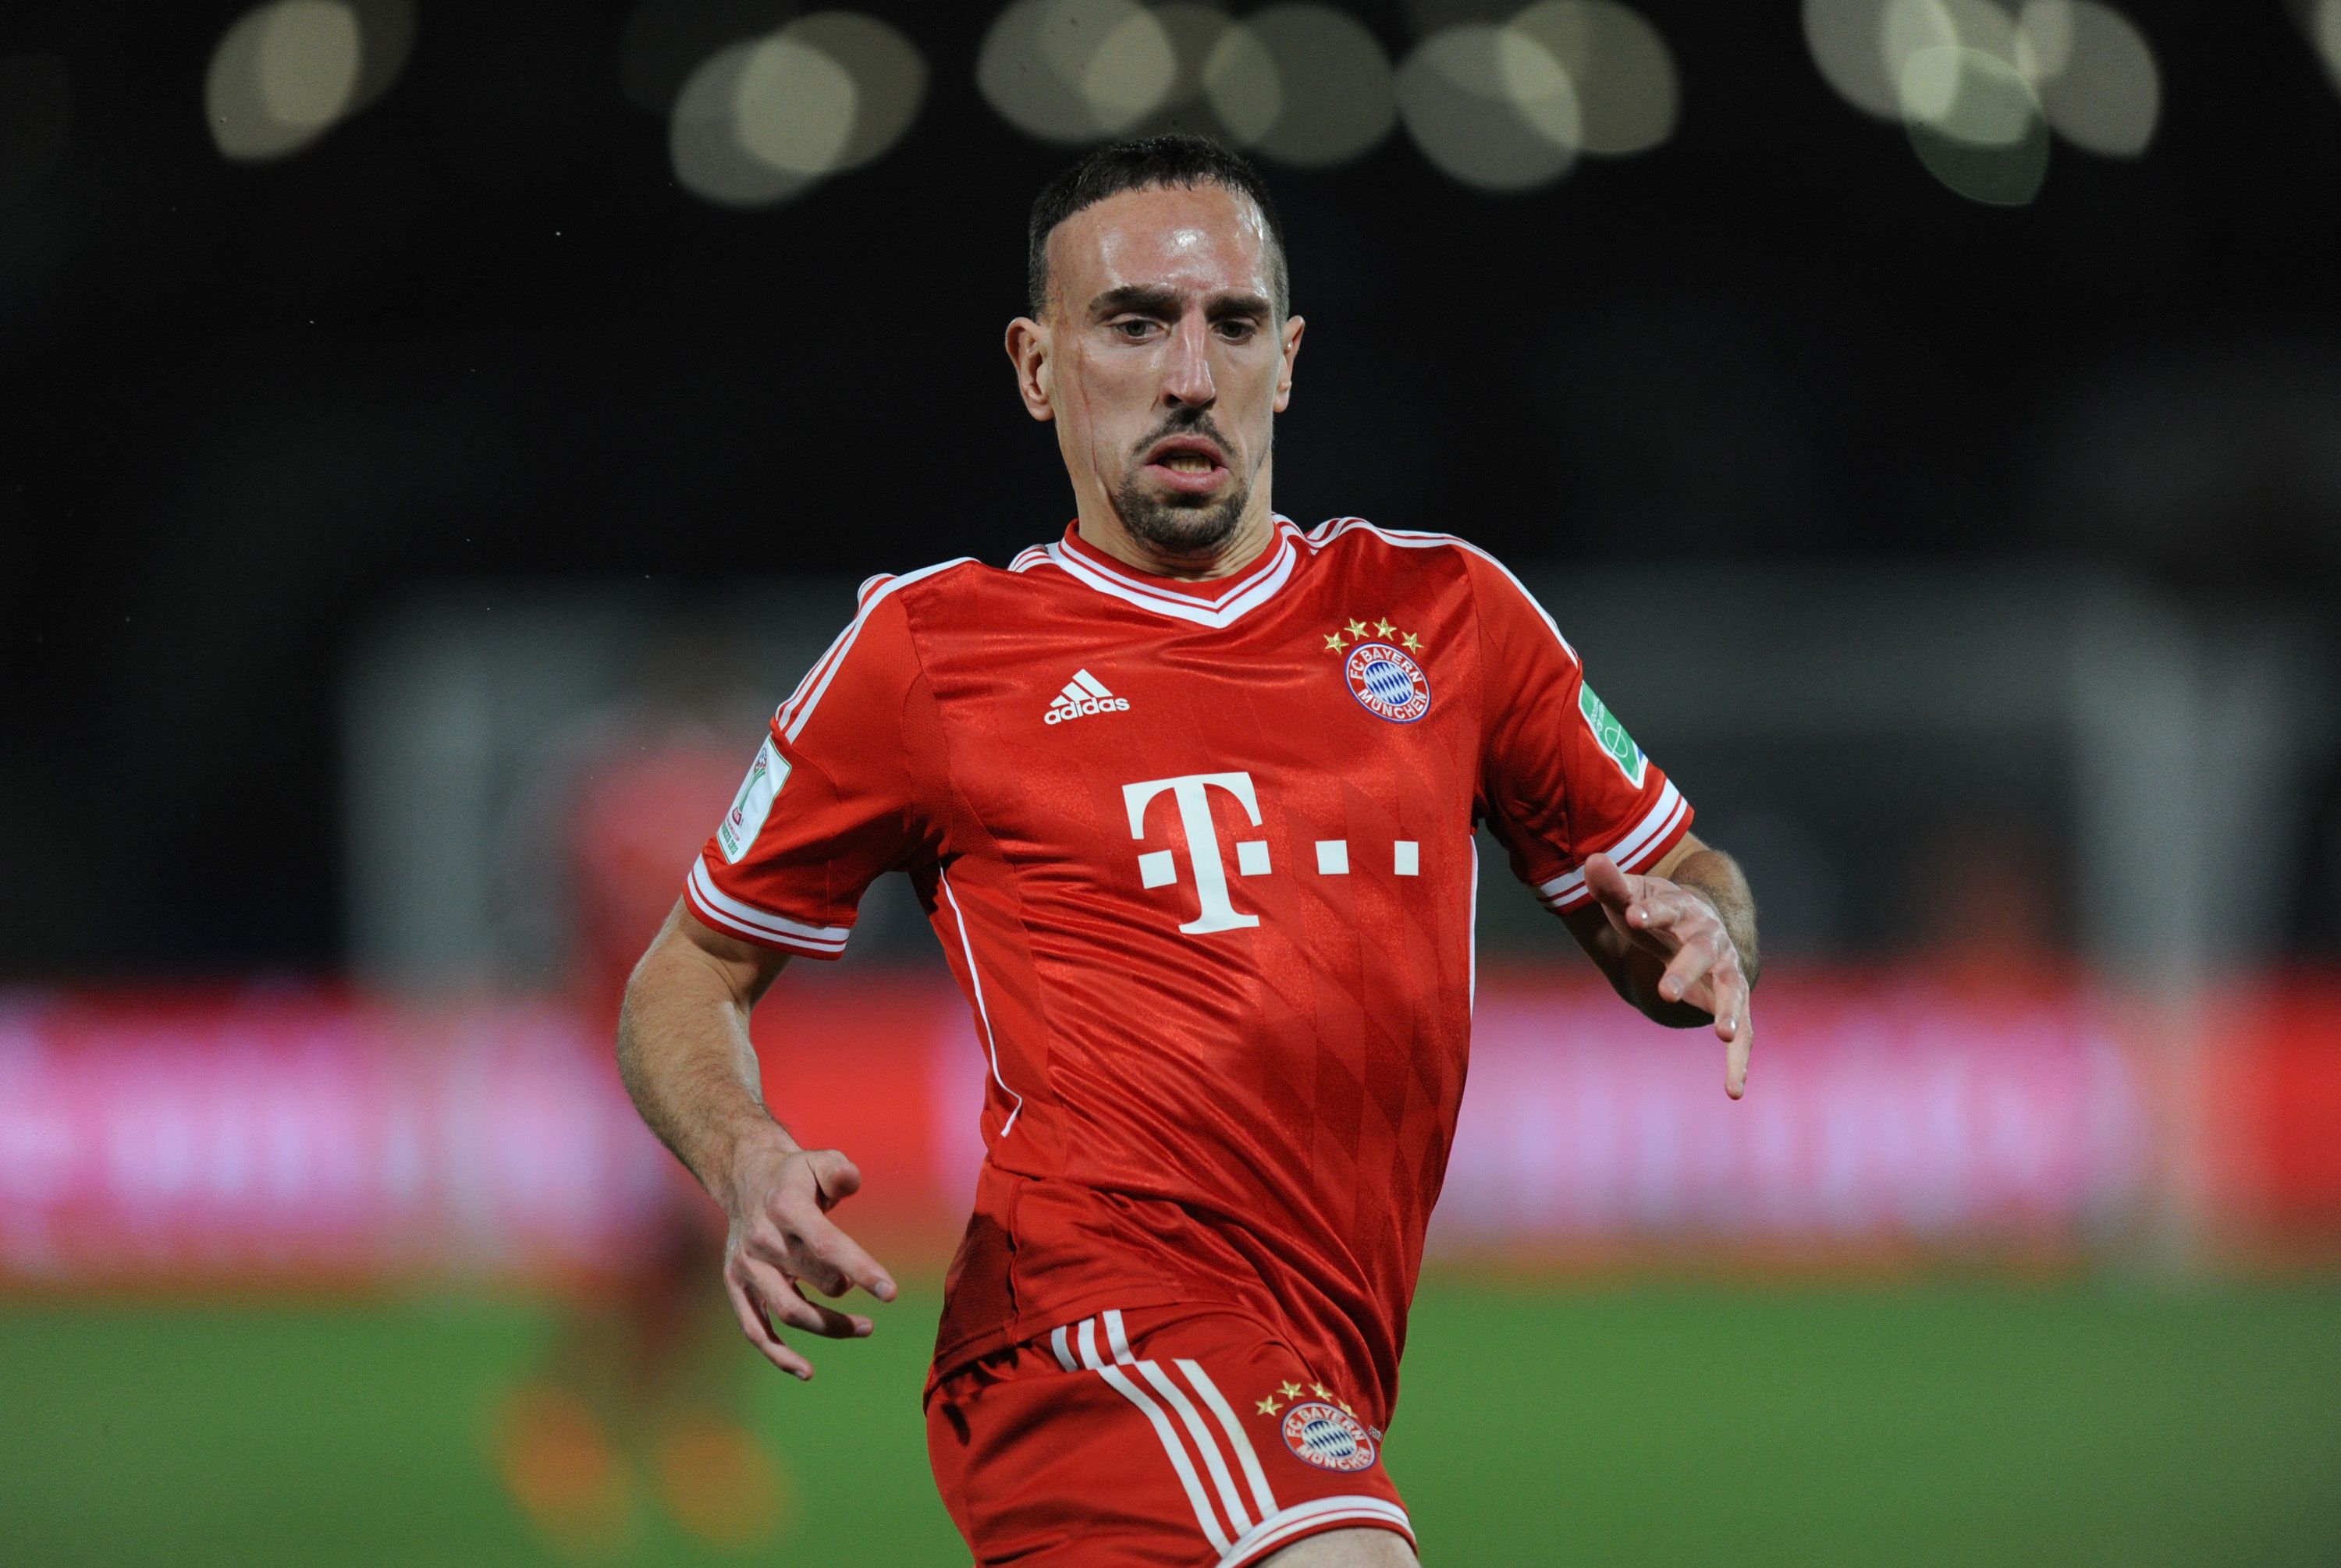 Franck Ribery in action for Bayern Munich